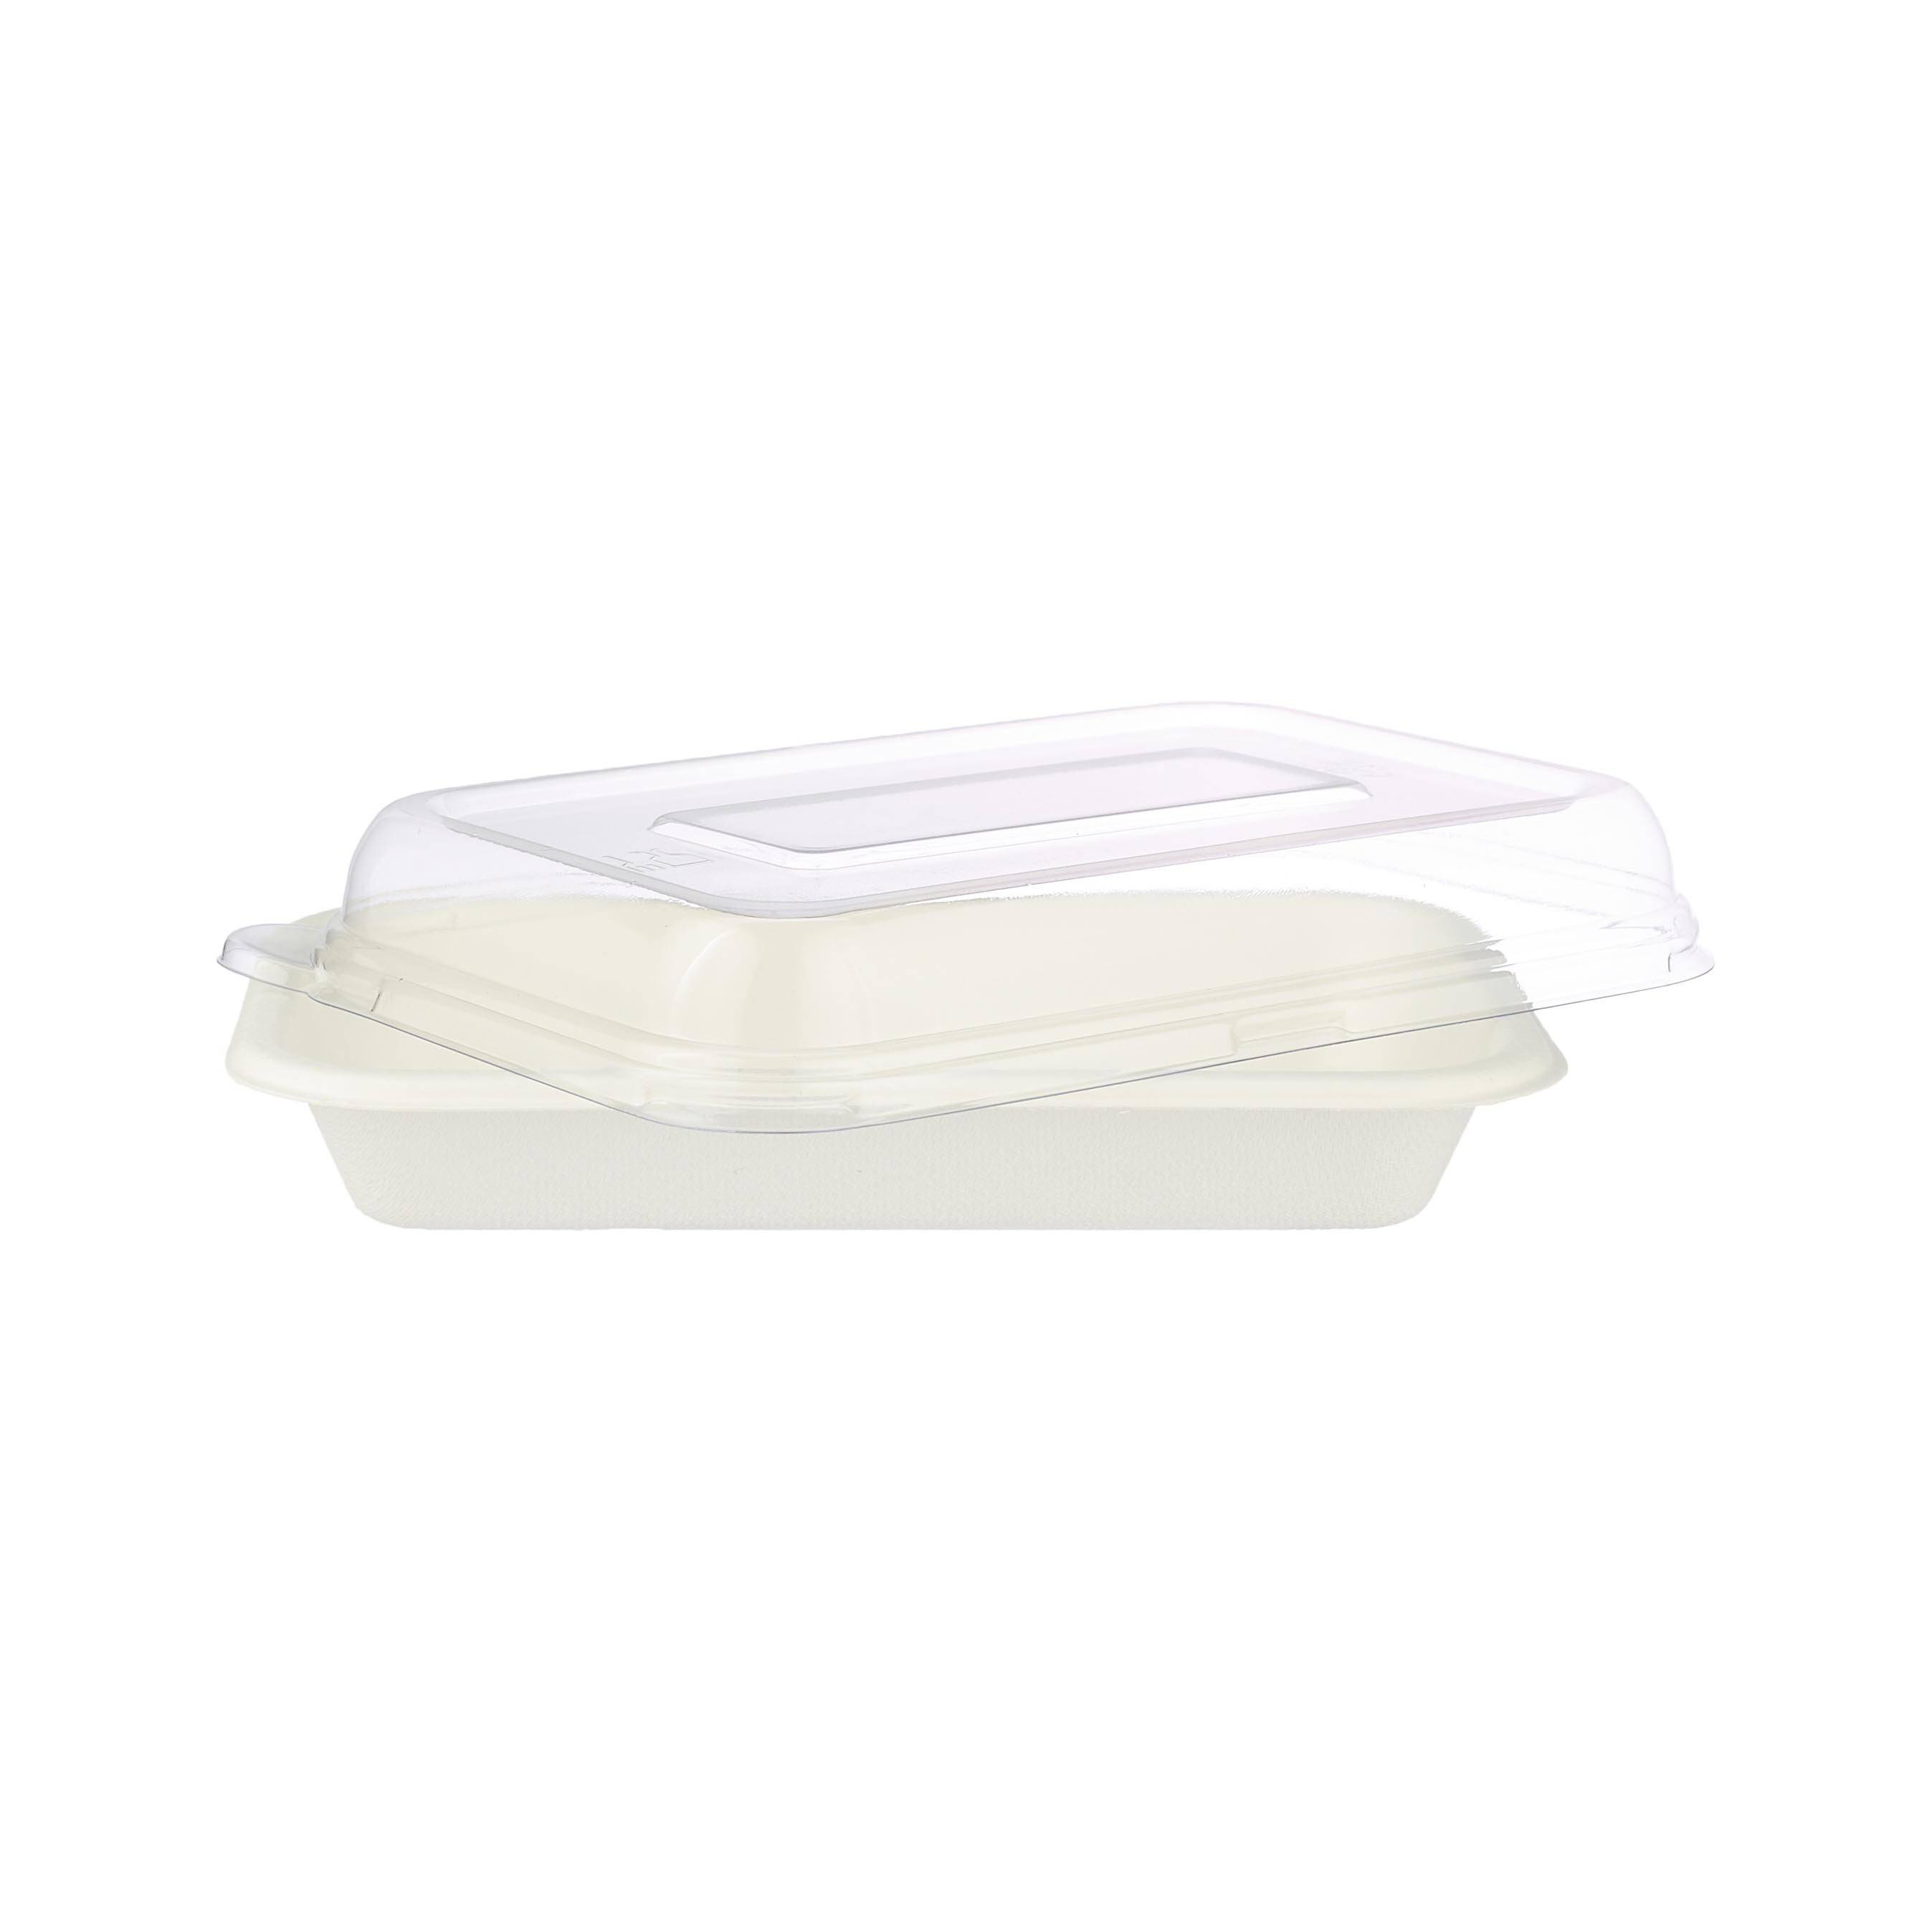 Hotpack Bio-Degradable 12/16 Oz Multi-Purpose Container Lid Only